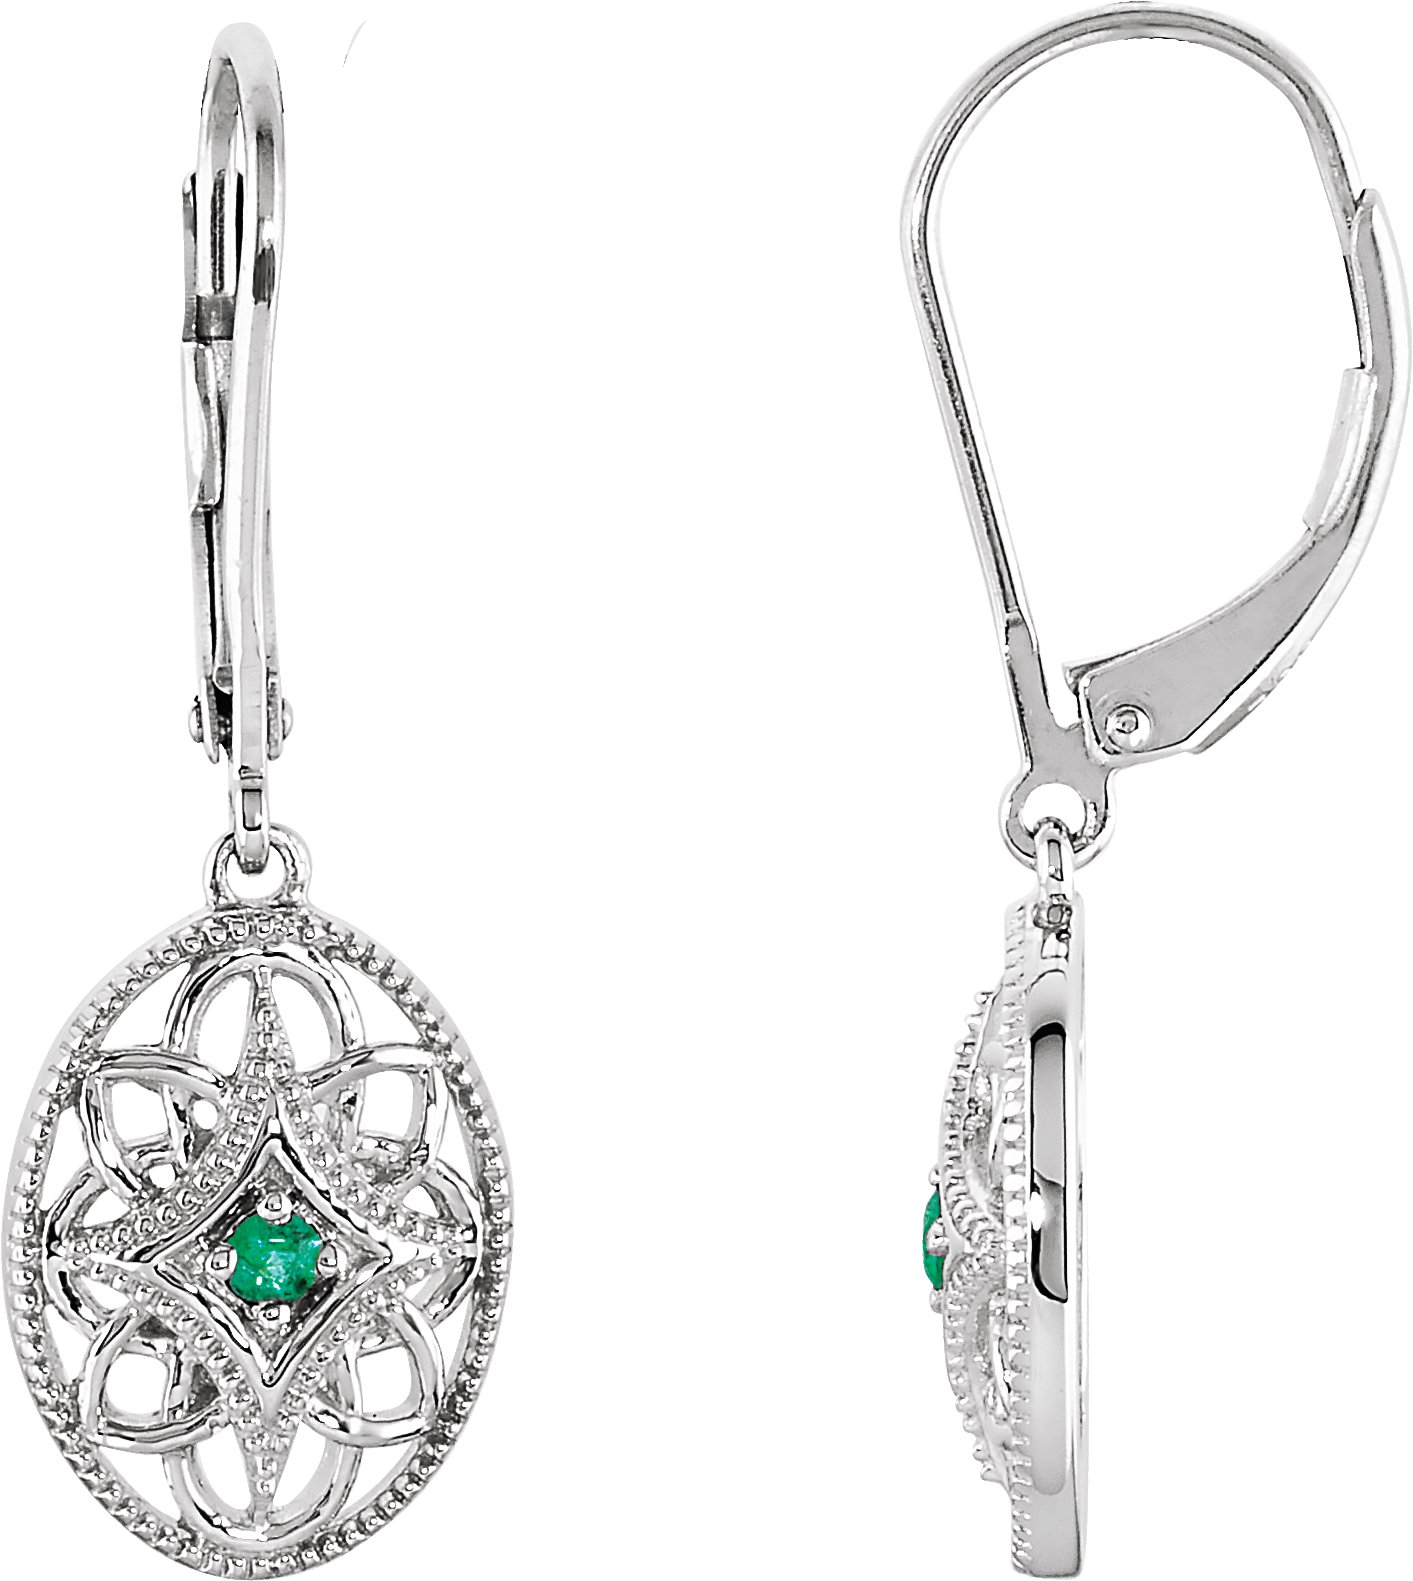 Sterling Silver Natural Emerald Lever Back Earrings